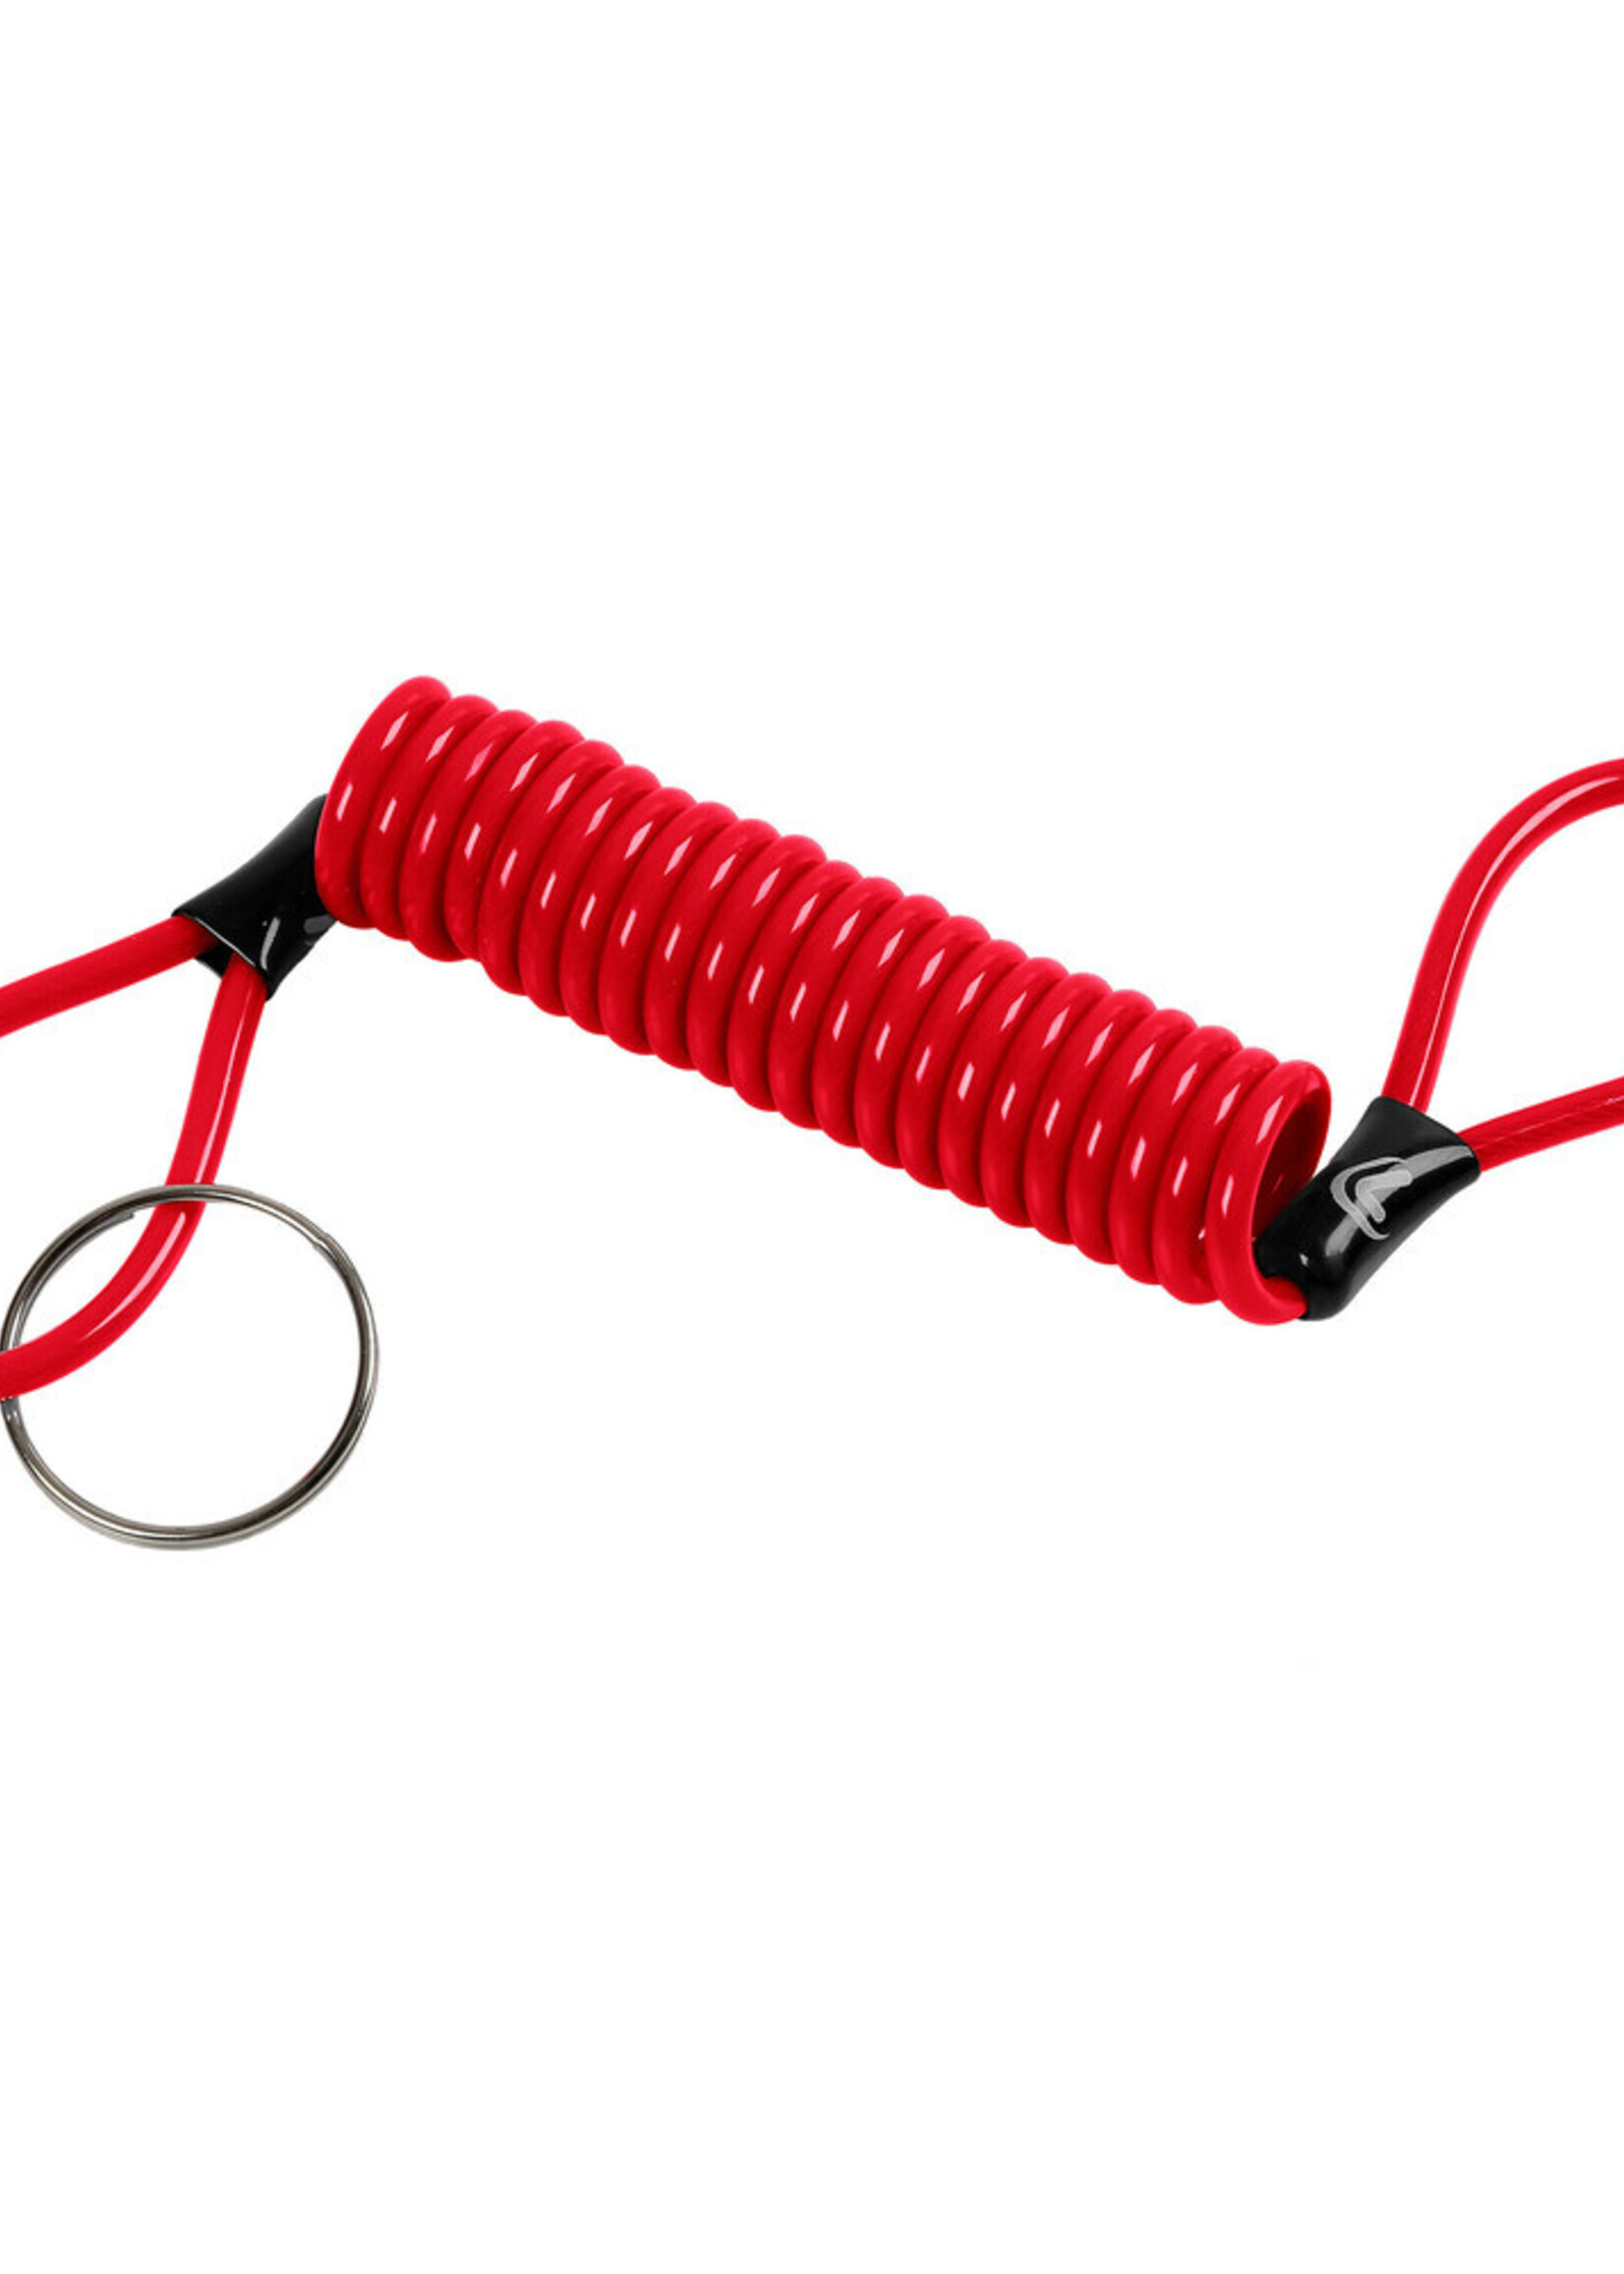 Lampa Reminder, steel spiral cable - Red